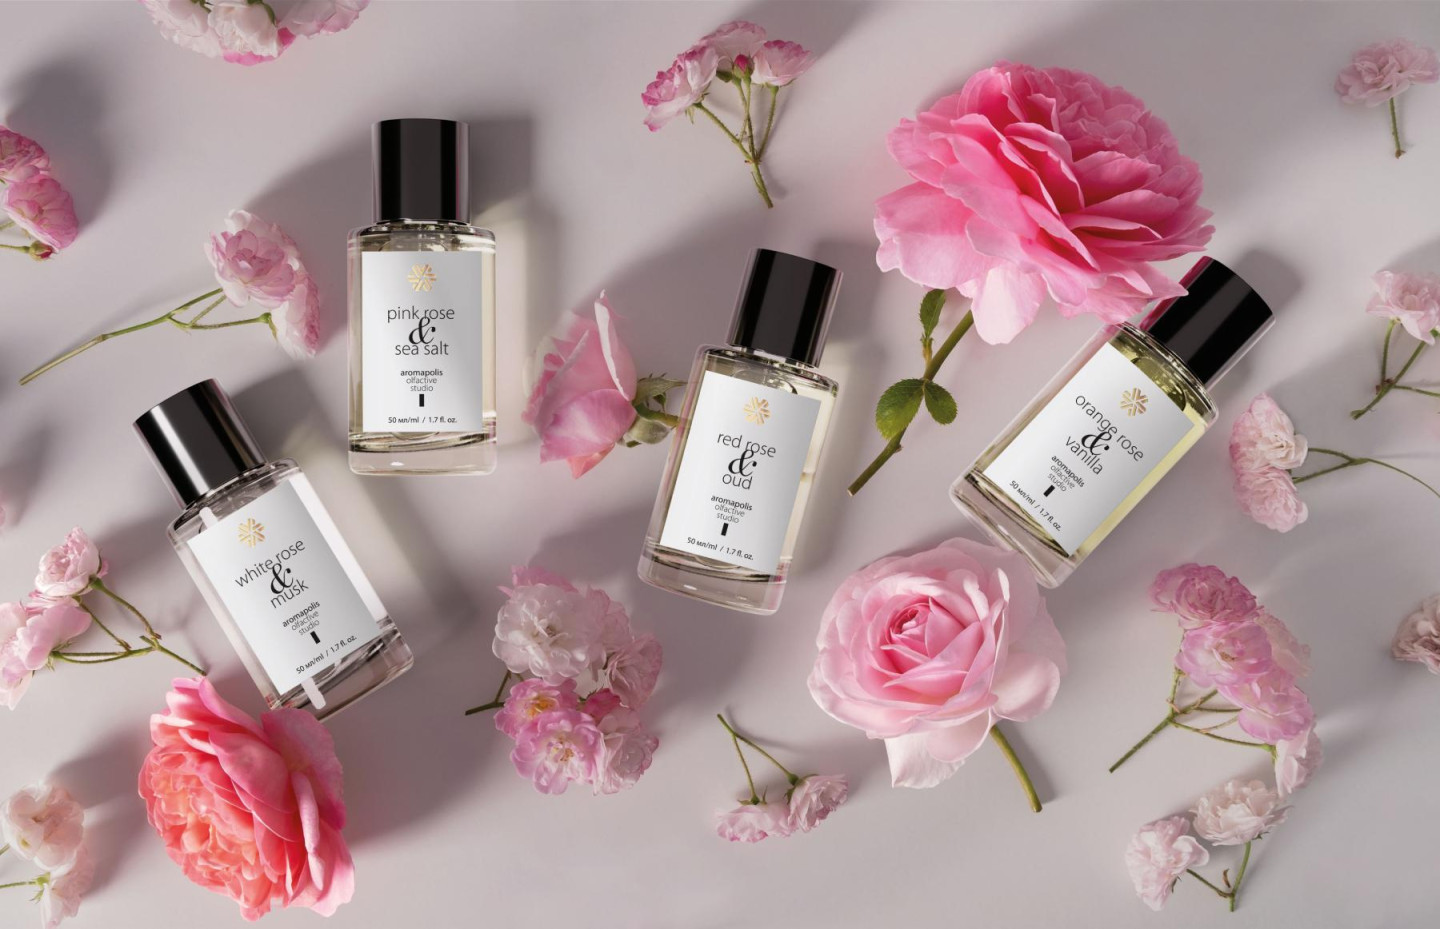 Siberian Wellness has released a collection of Aromapolis Rose Edition fragrances